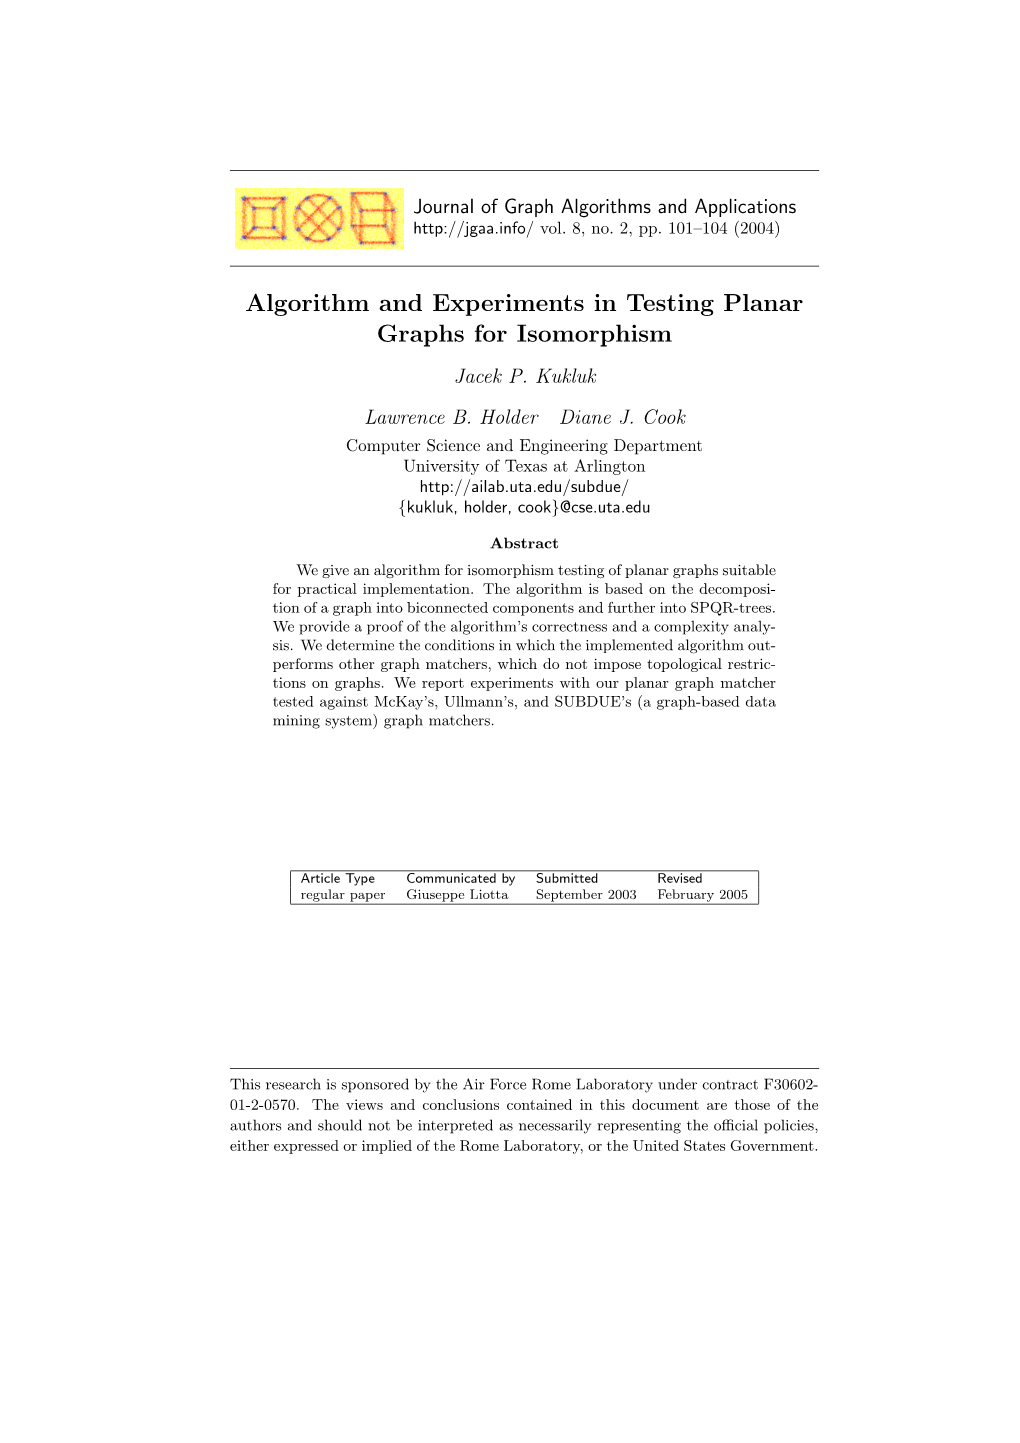 Algorithm and Experiments in Testing Planar Graphs for Isomorphism Jacek P